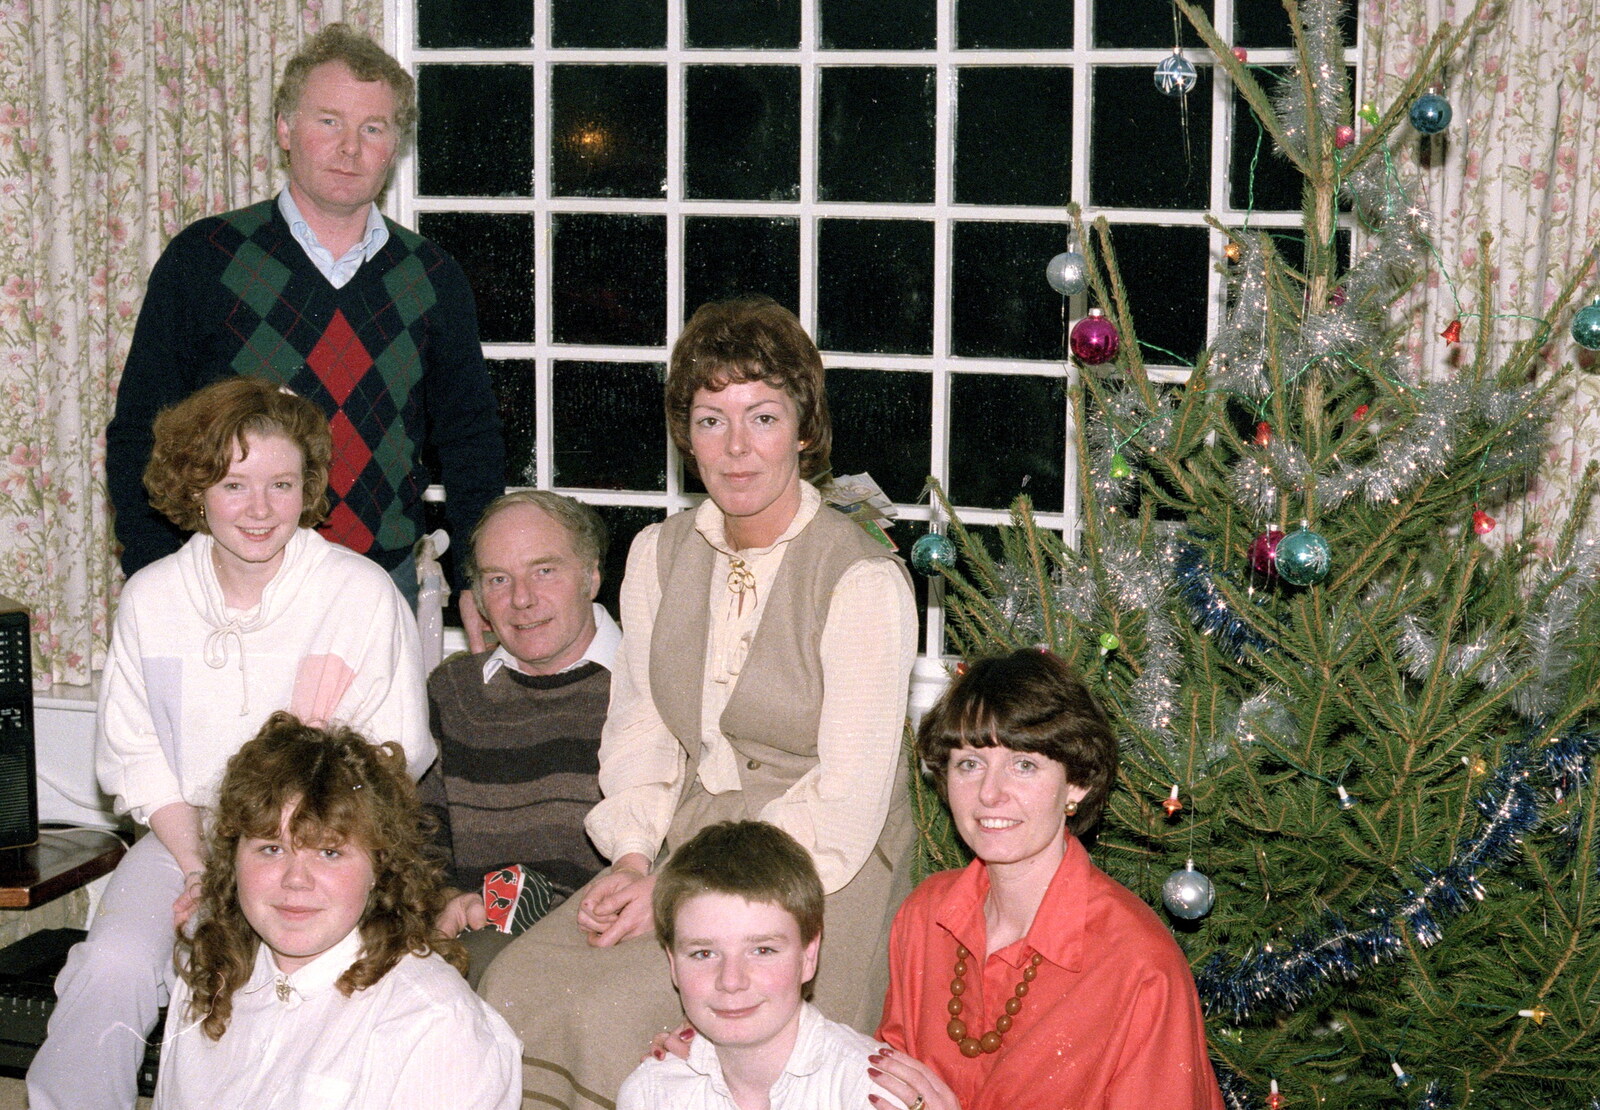 More family from Christmas in Macclesfield and Wetherby, Cheshire  and Yorkshire - 25th December 1985